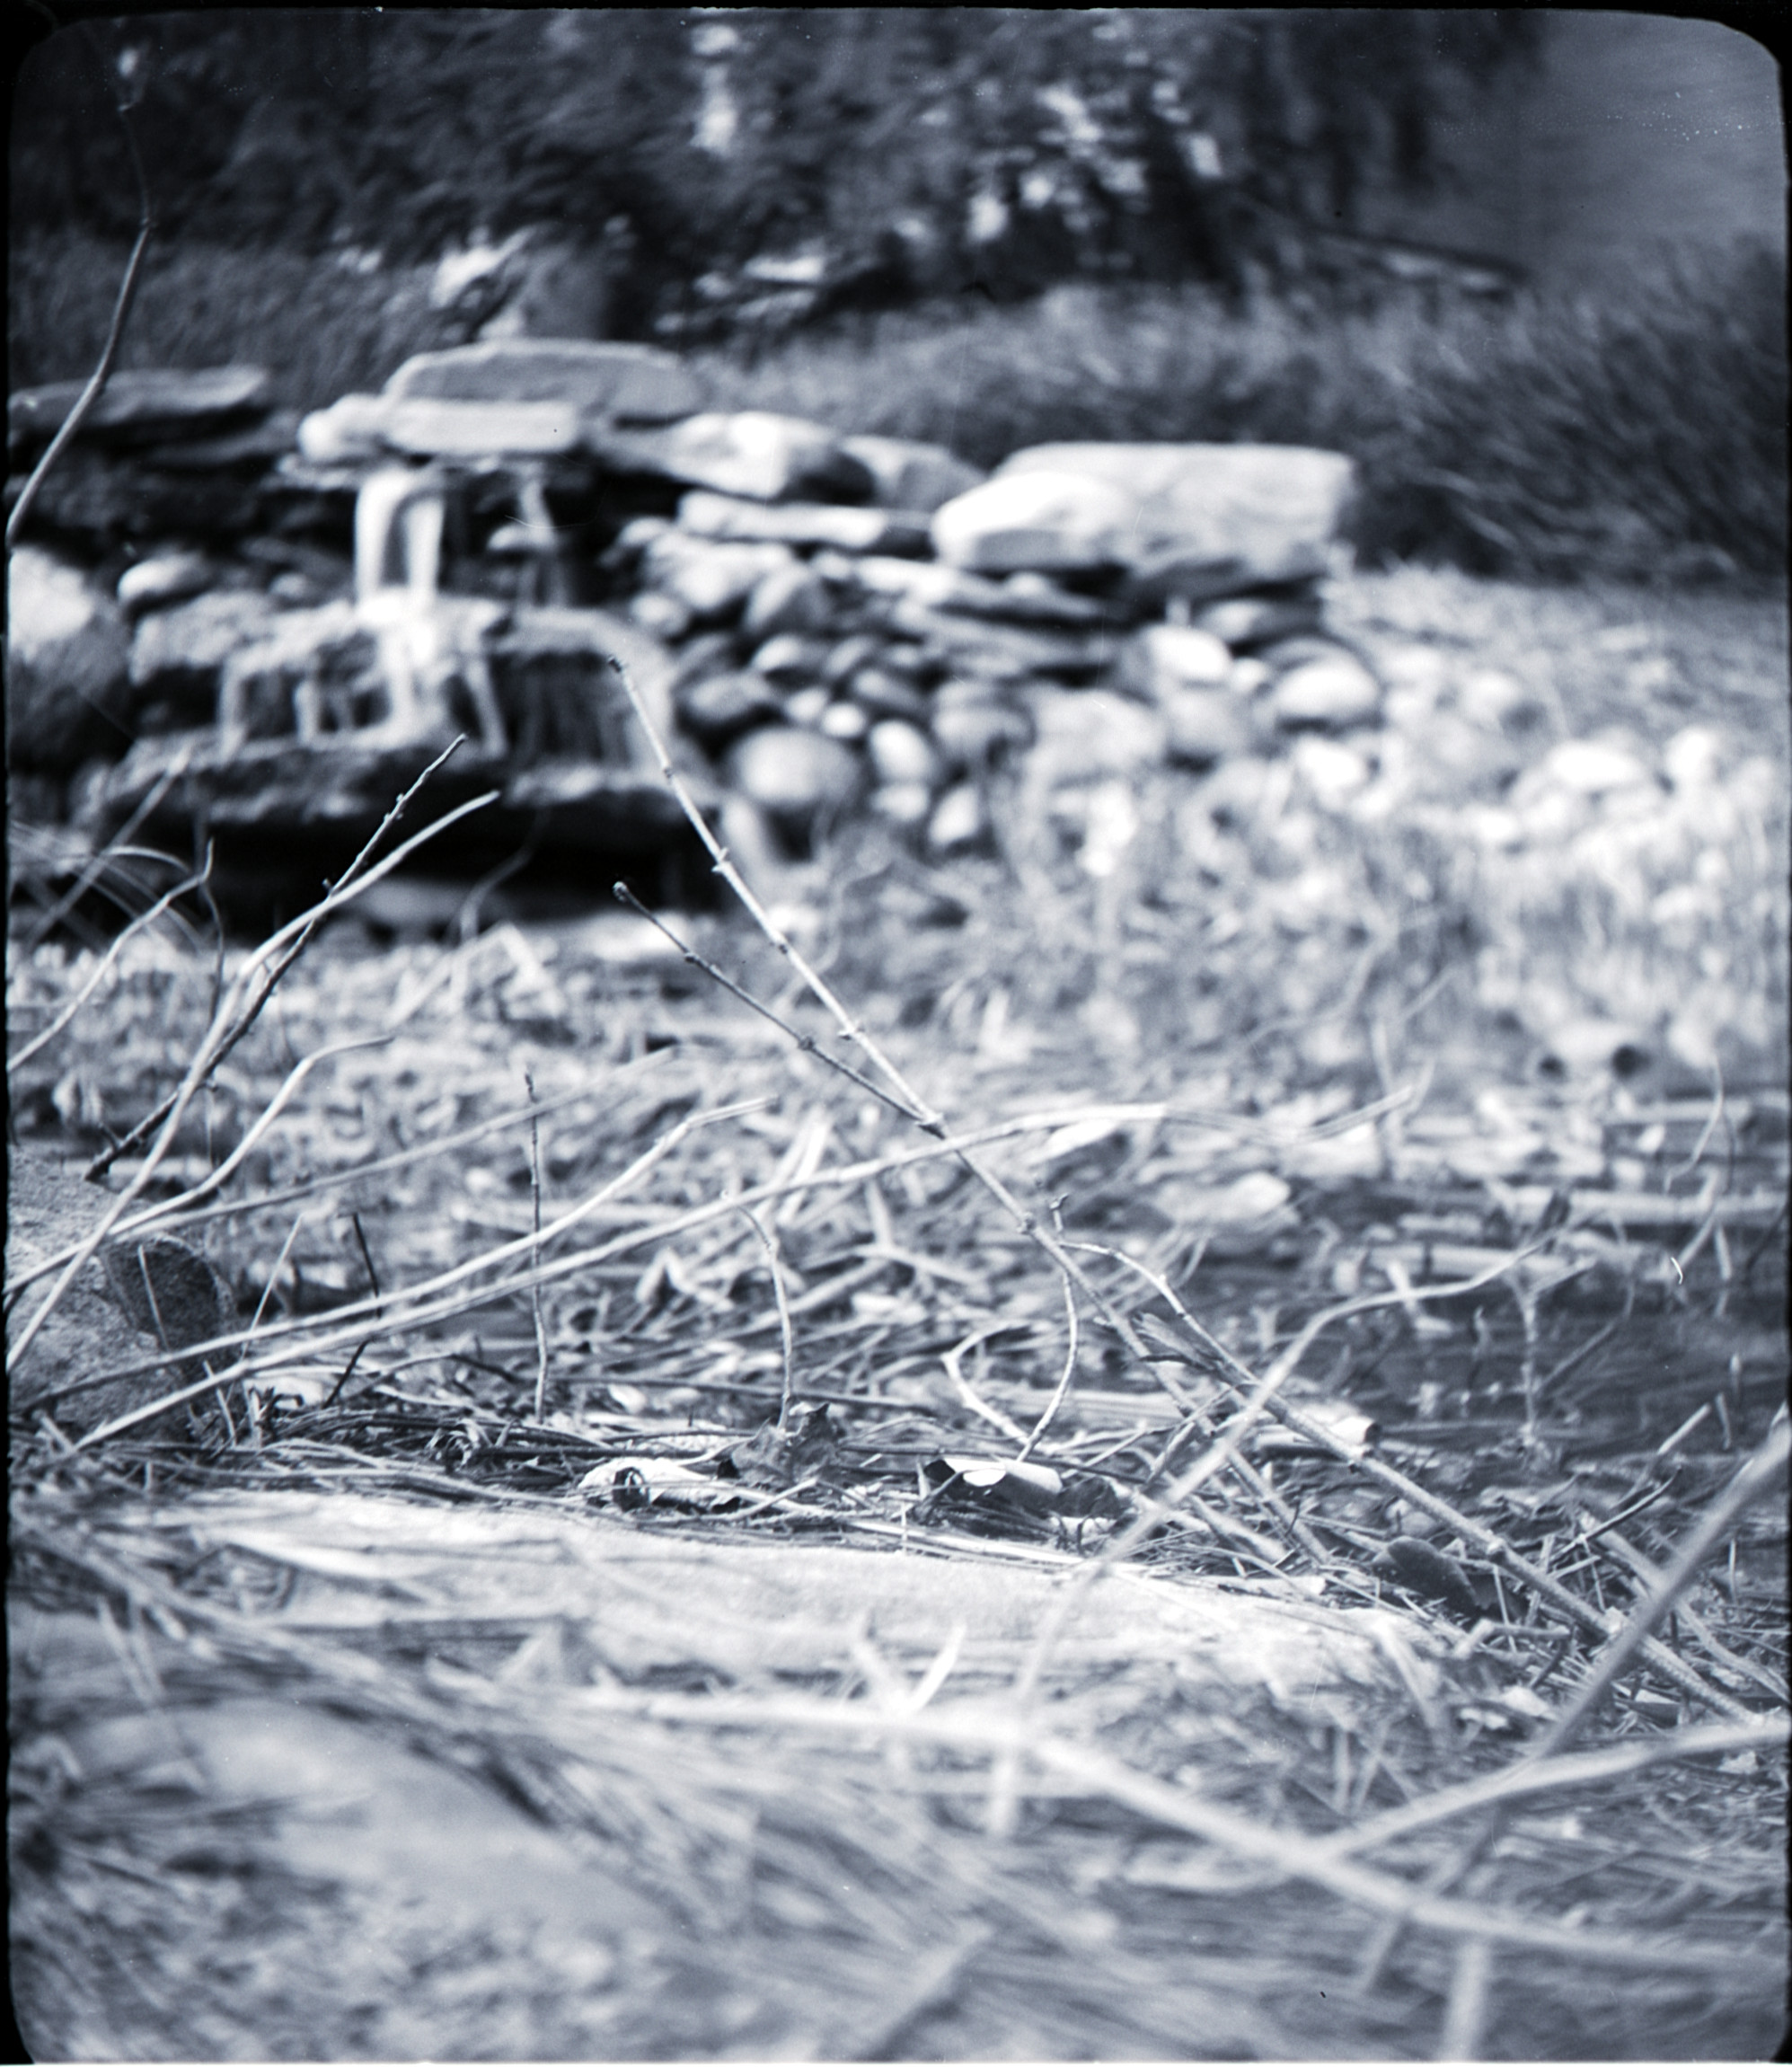 a black and white photo of some twigs and grass (in focus) in front of rocks and a small water feature (blurry)